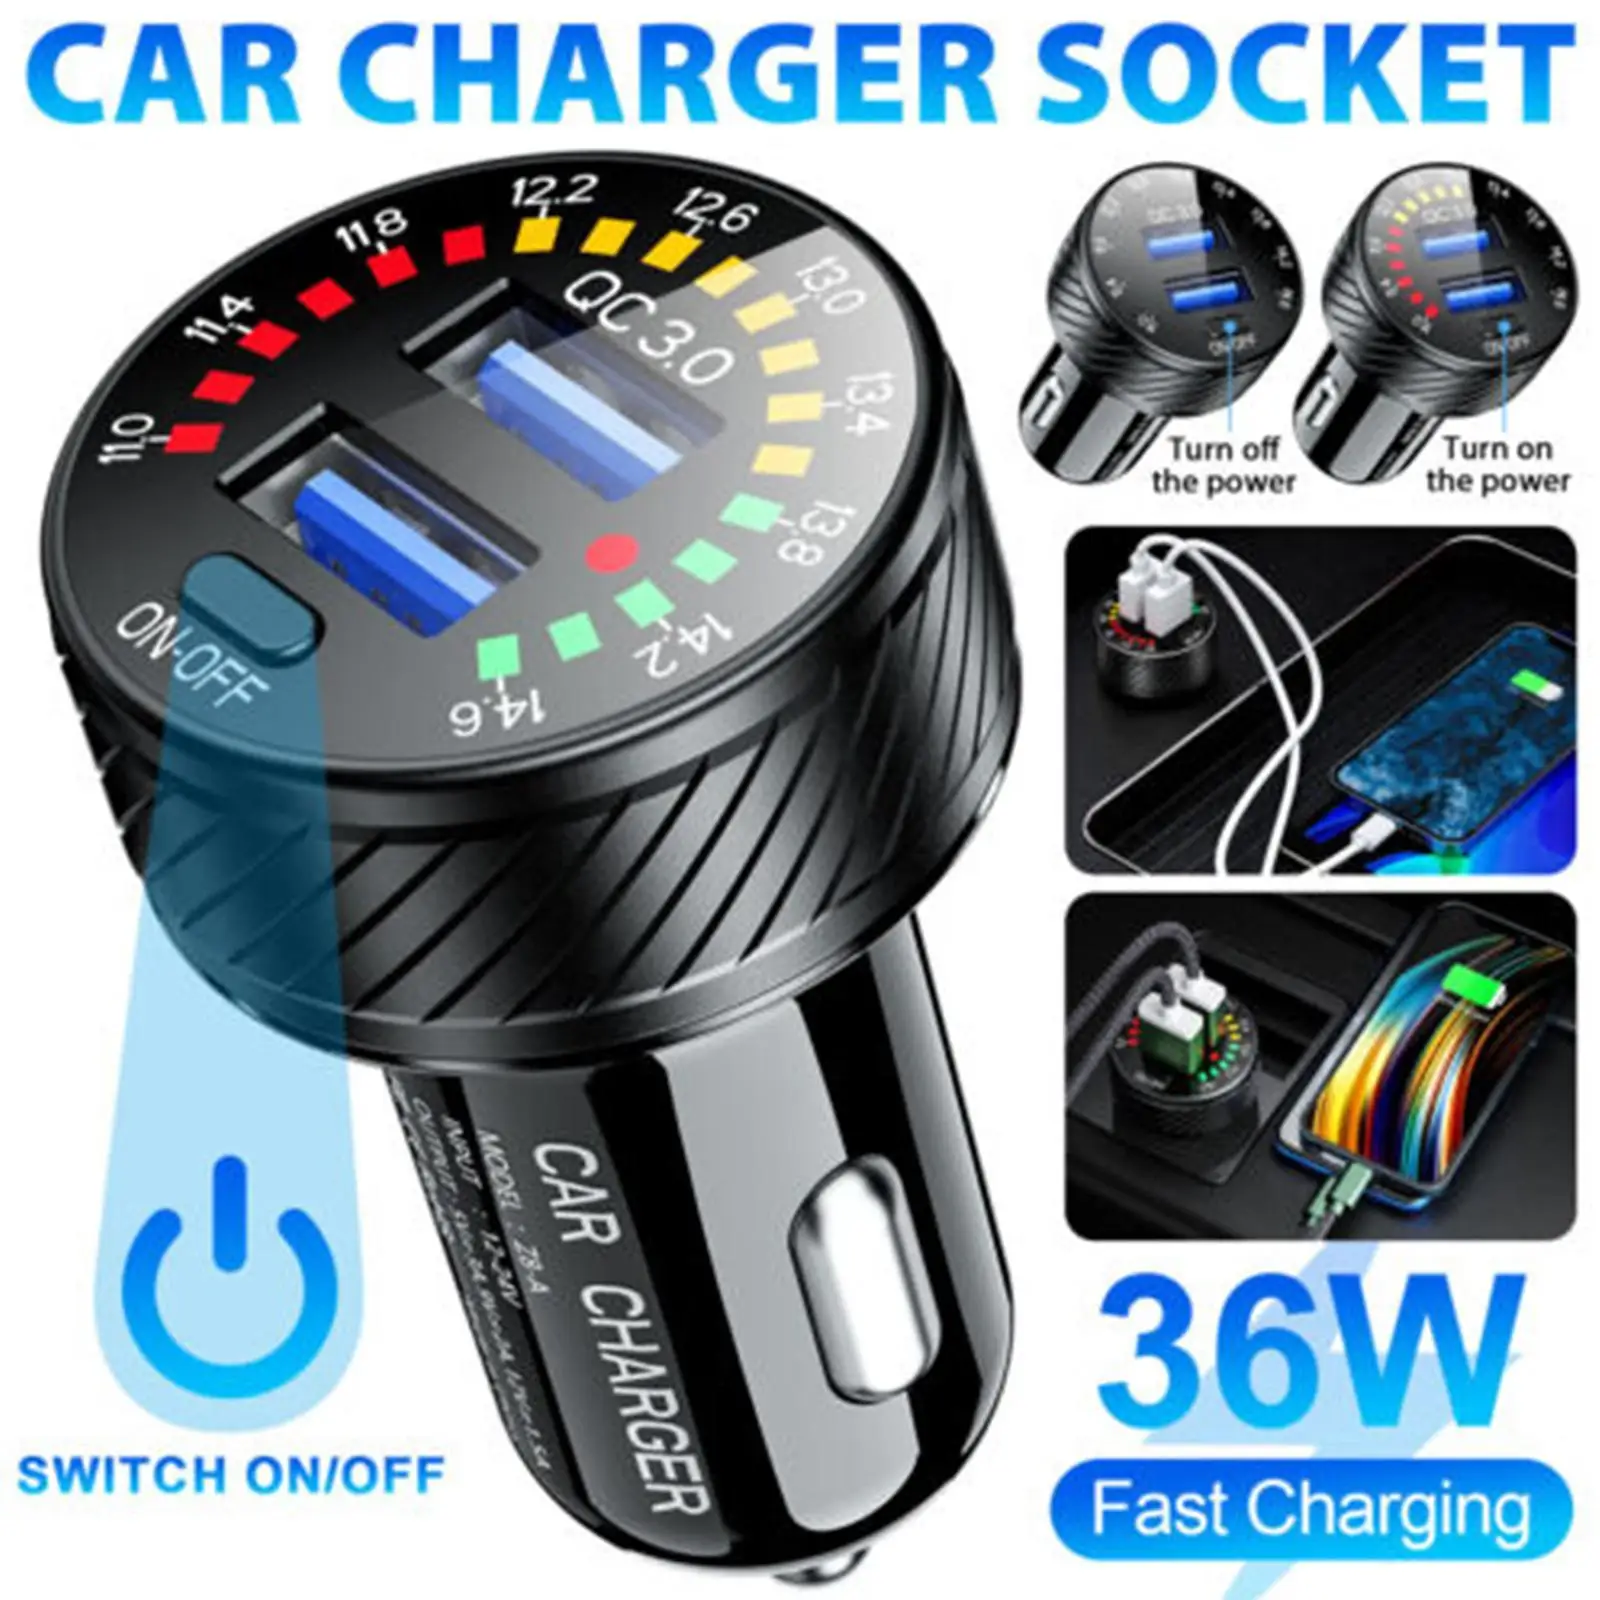 

36W USB Car Charger Dual QC3.0 Quick Charge Cigarette Lighter Adapter Fast Charge Voltmeter For Mobile Phone Tablet